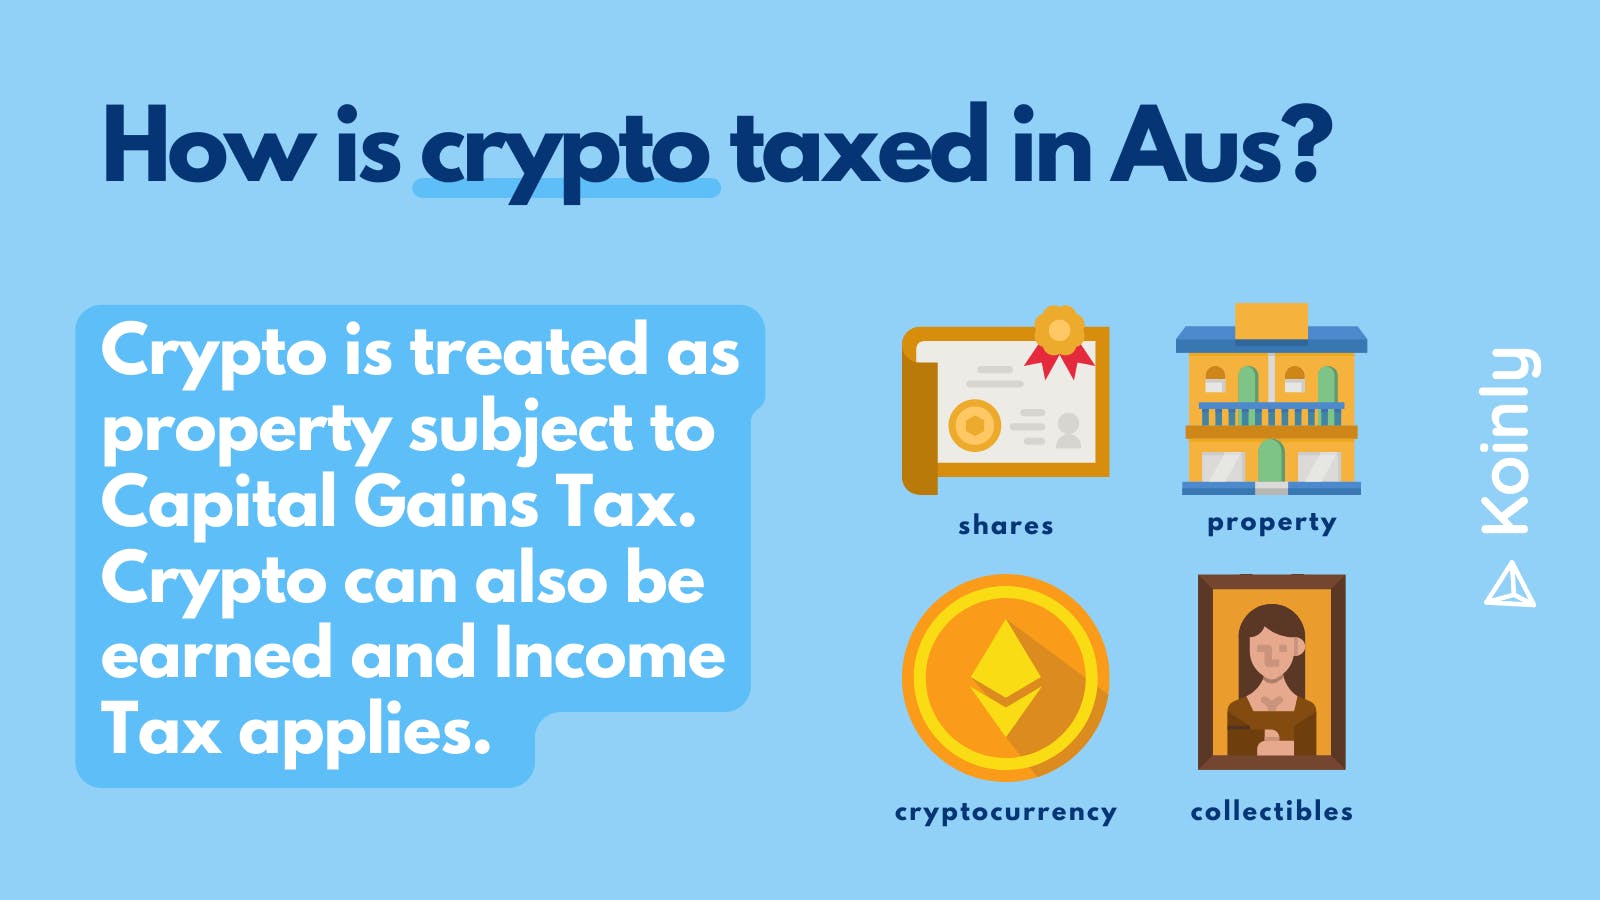 How cryptocurrency is taxed in Australia